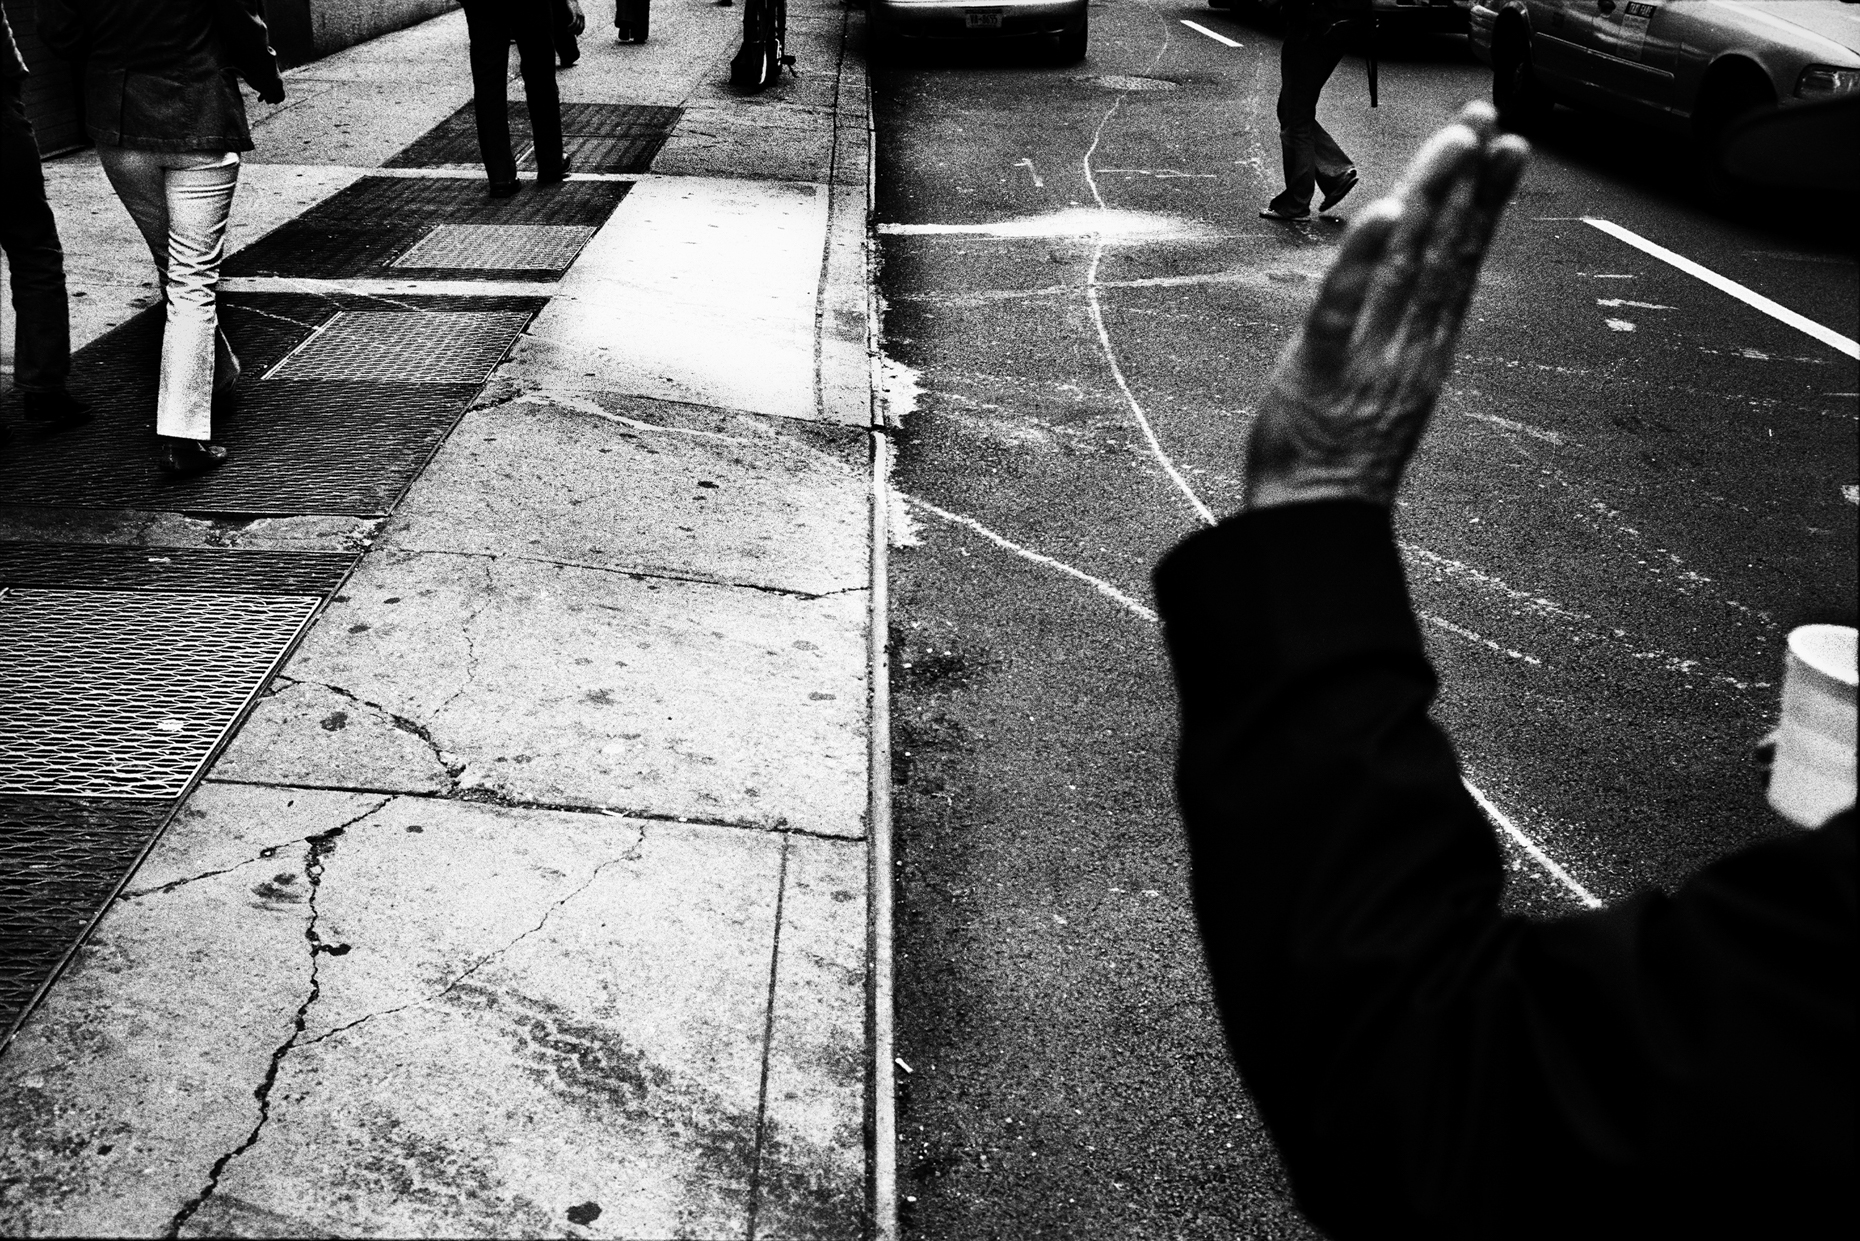 23rd St., between 7th & 8th Ave., New York City, 2006 (from Dear New Yorker)